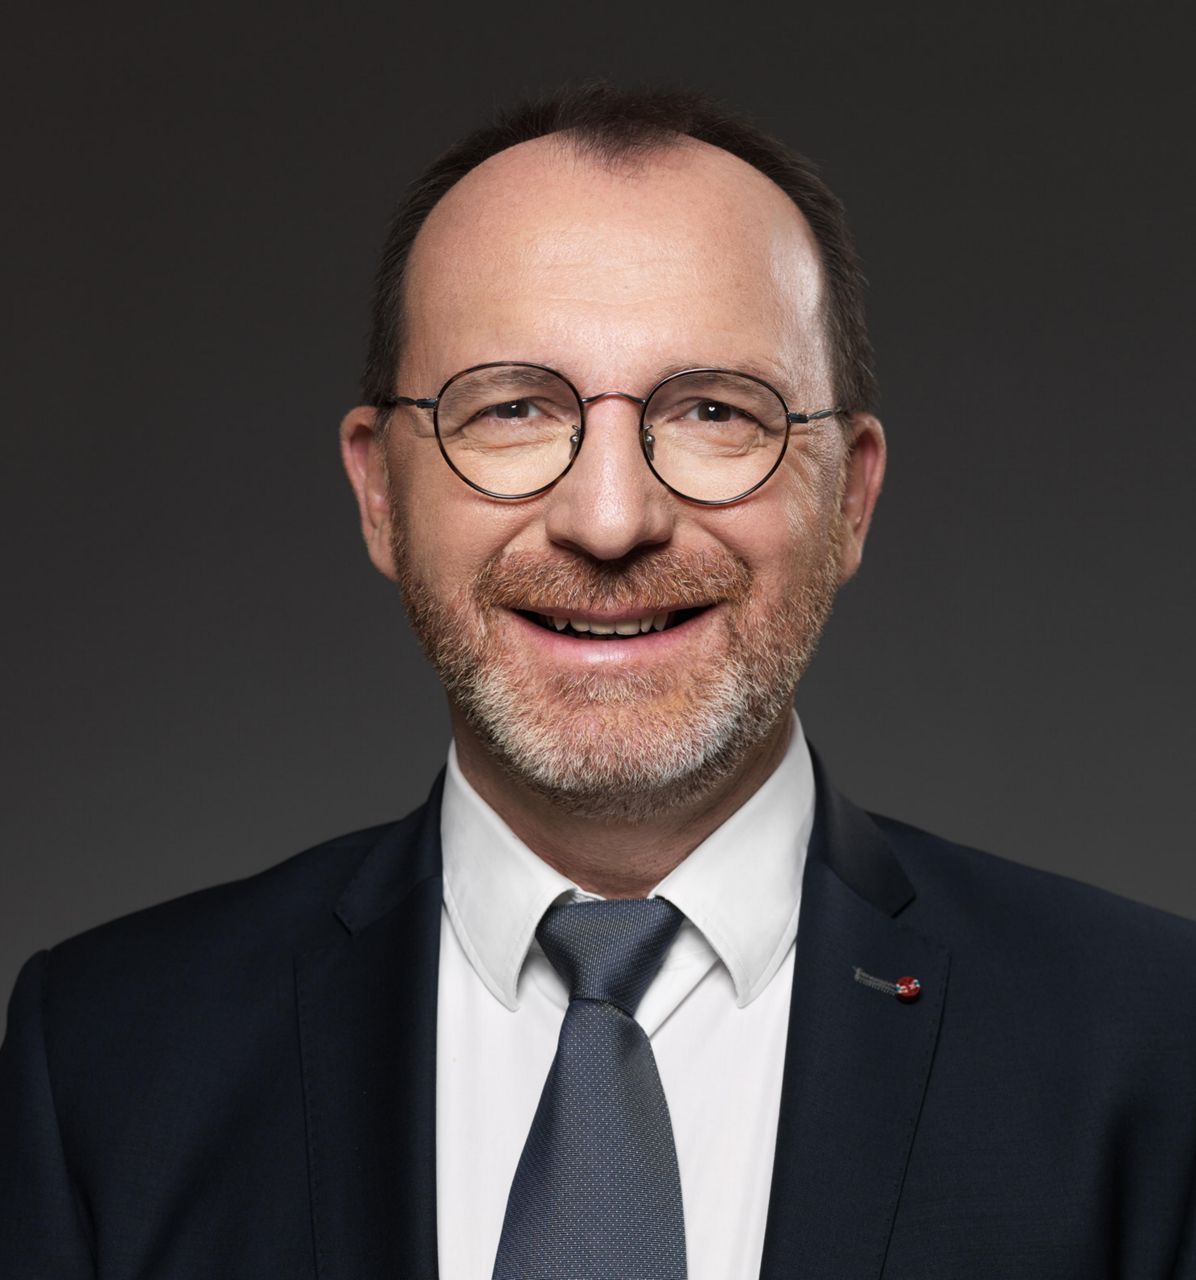 Georges Engel in the interview for Delano on 23 May 2022